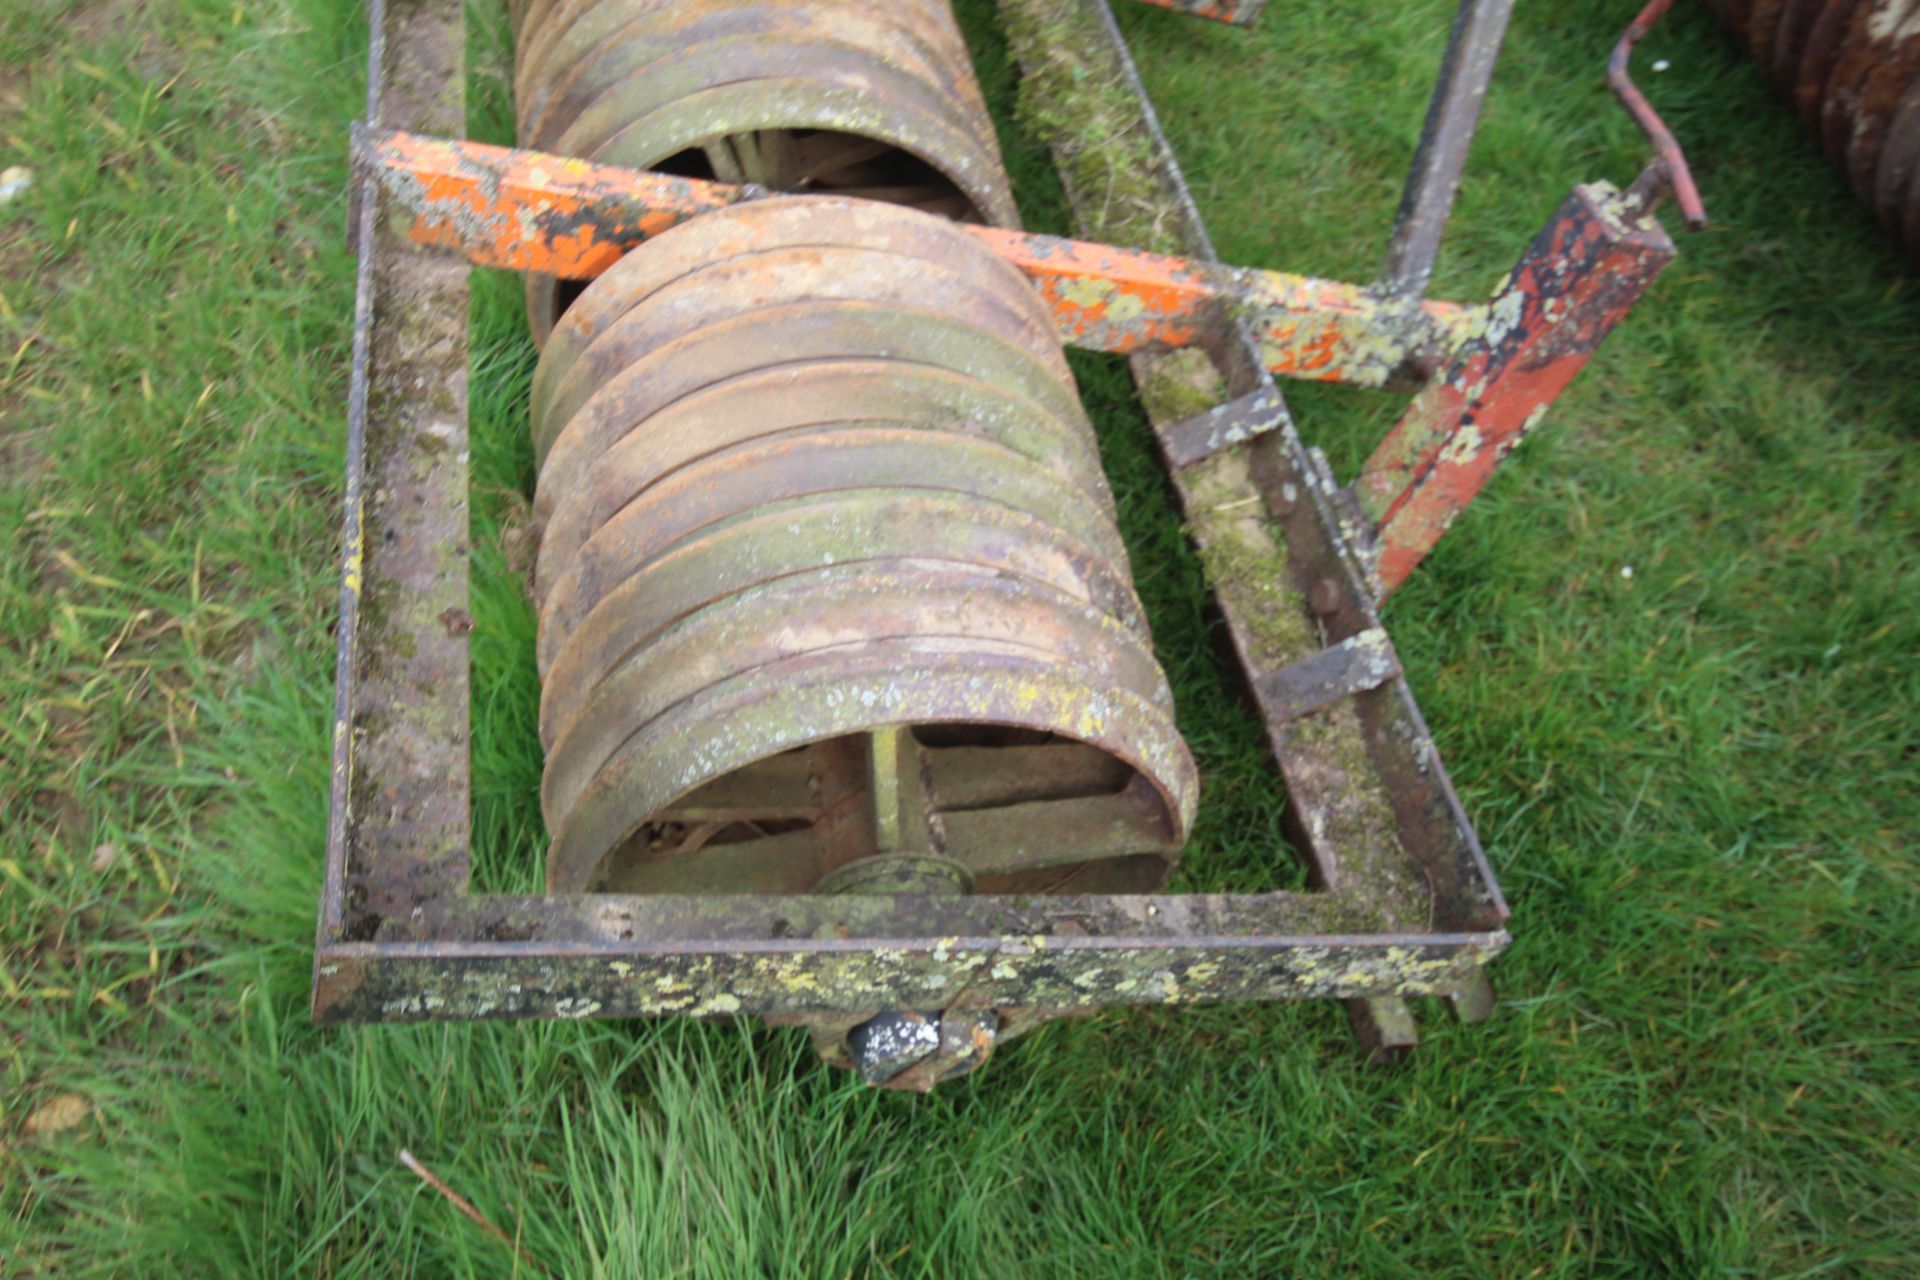 Linkage mounted Cambridge roll. For sale due to retirement. V - Bild 8 aus 9